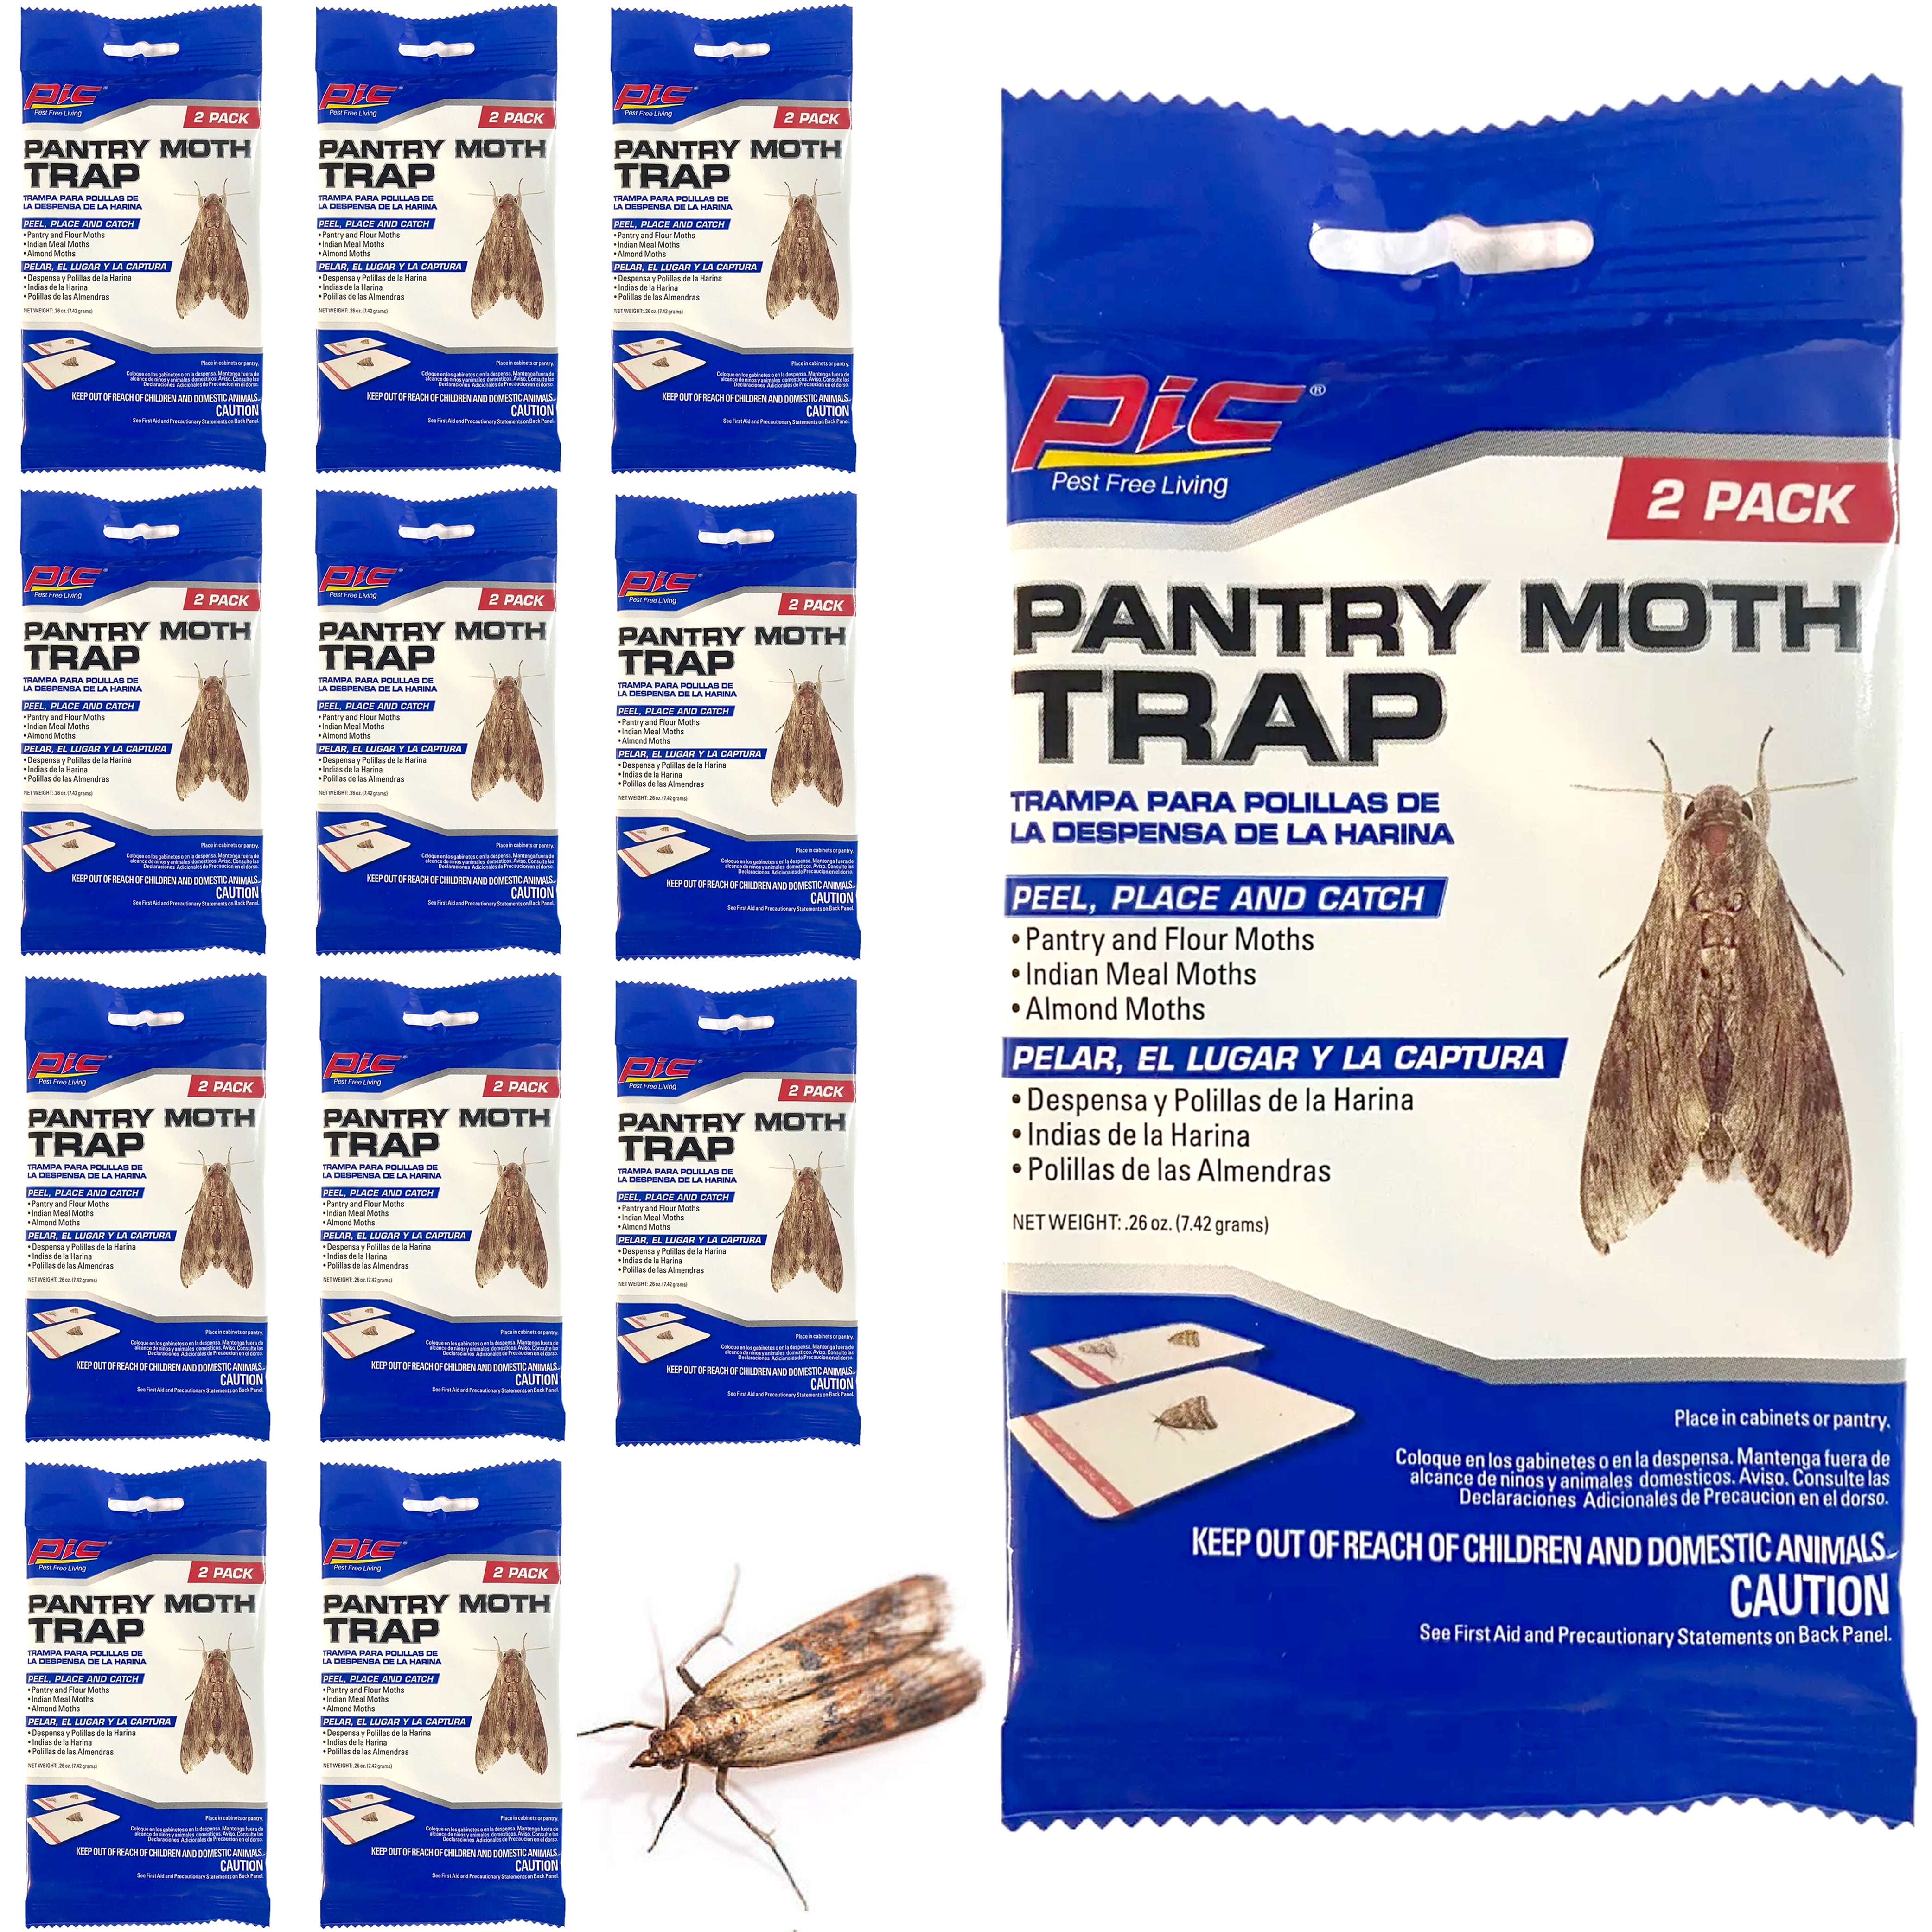 Reviews for TERRO Non-Toxic Indoor Pantry Moth Trap (2-Count)